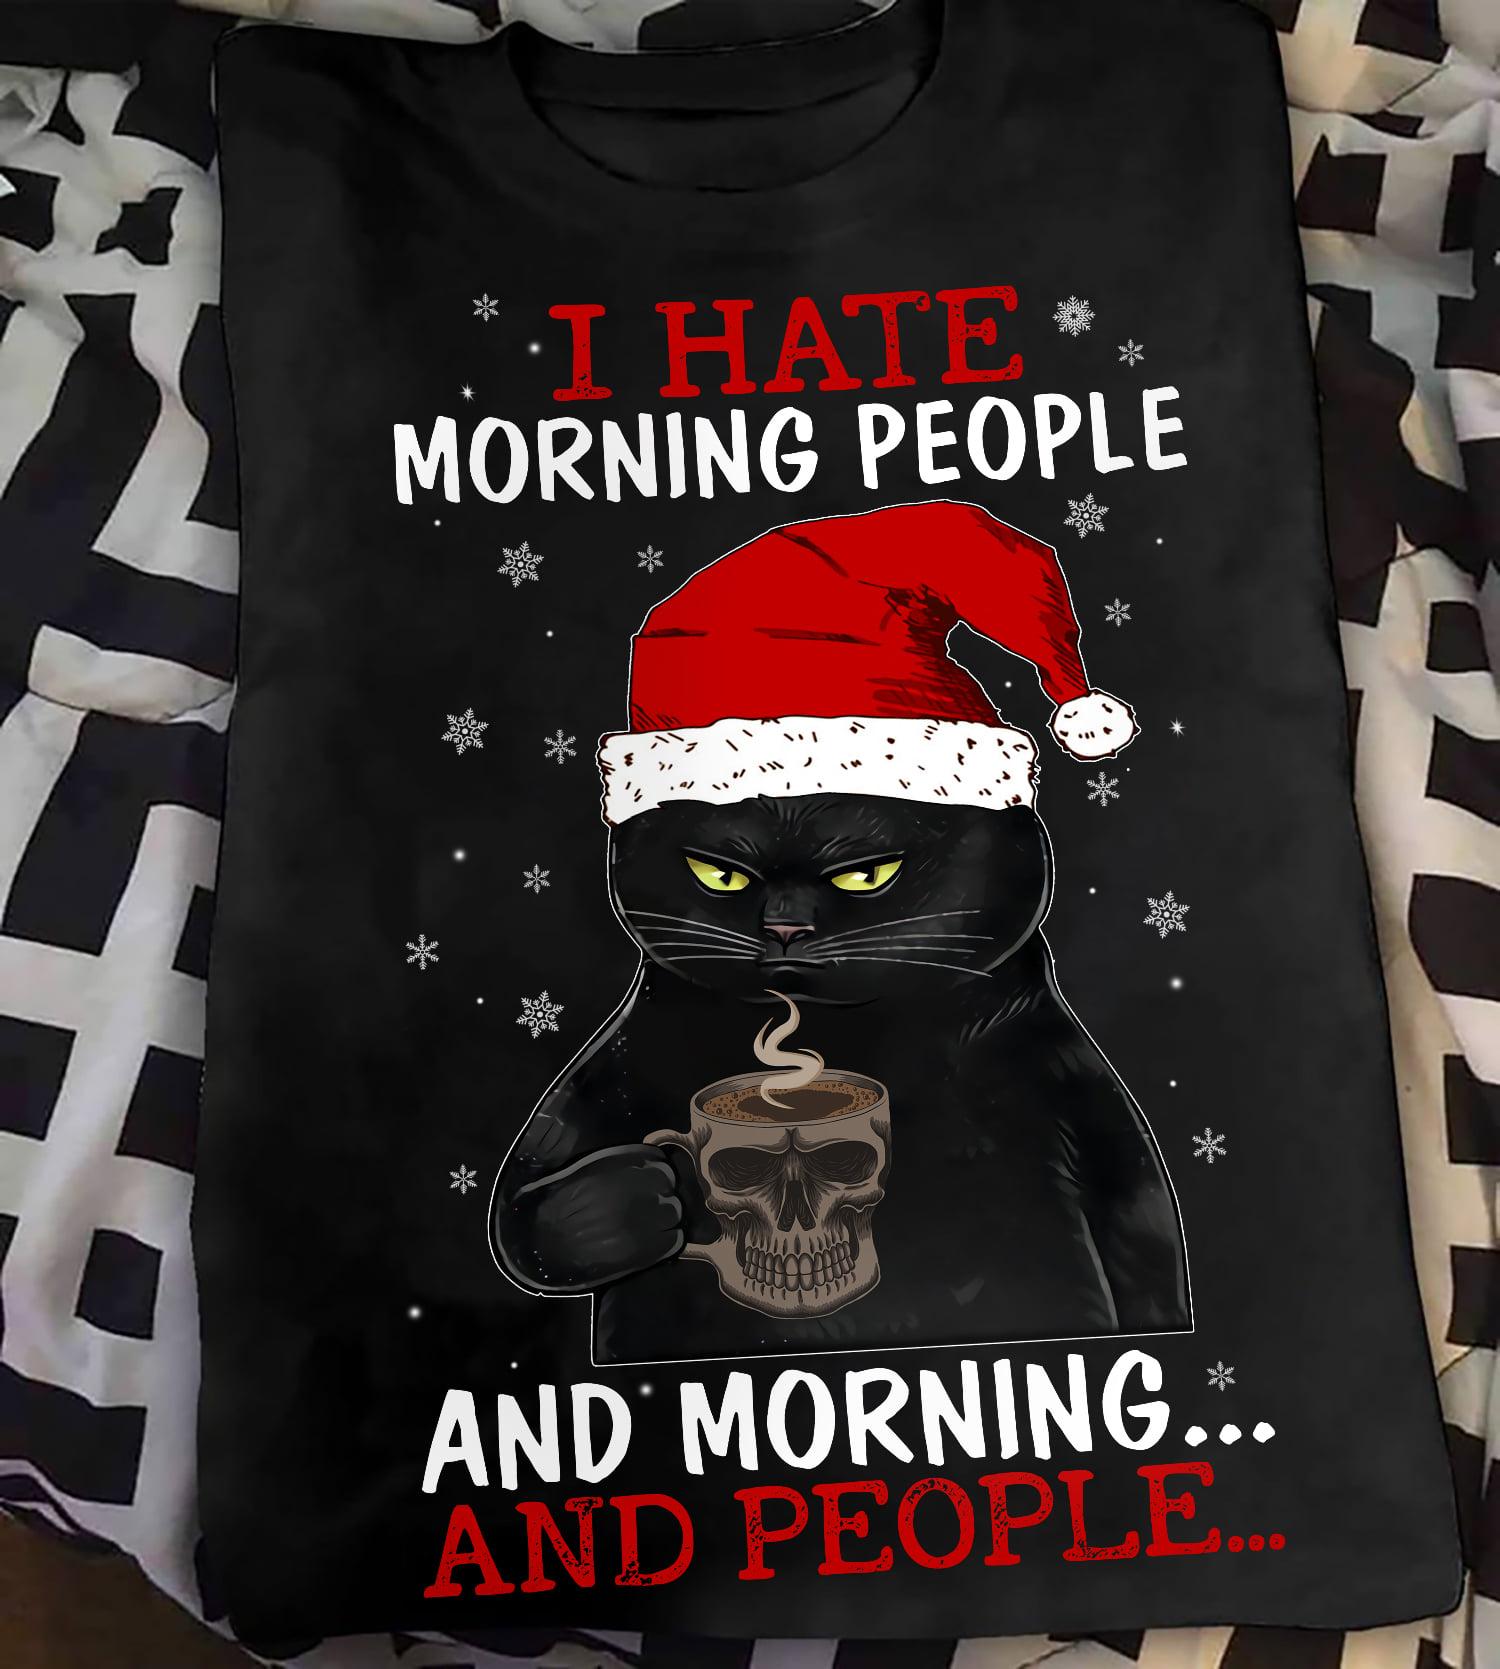 I hate morning people and morning and people - Social distancing lifestyle, black cat and coffee